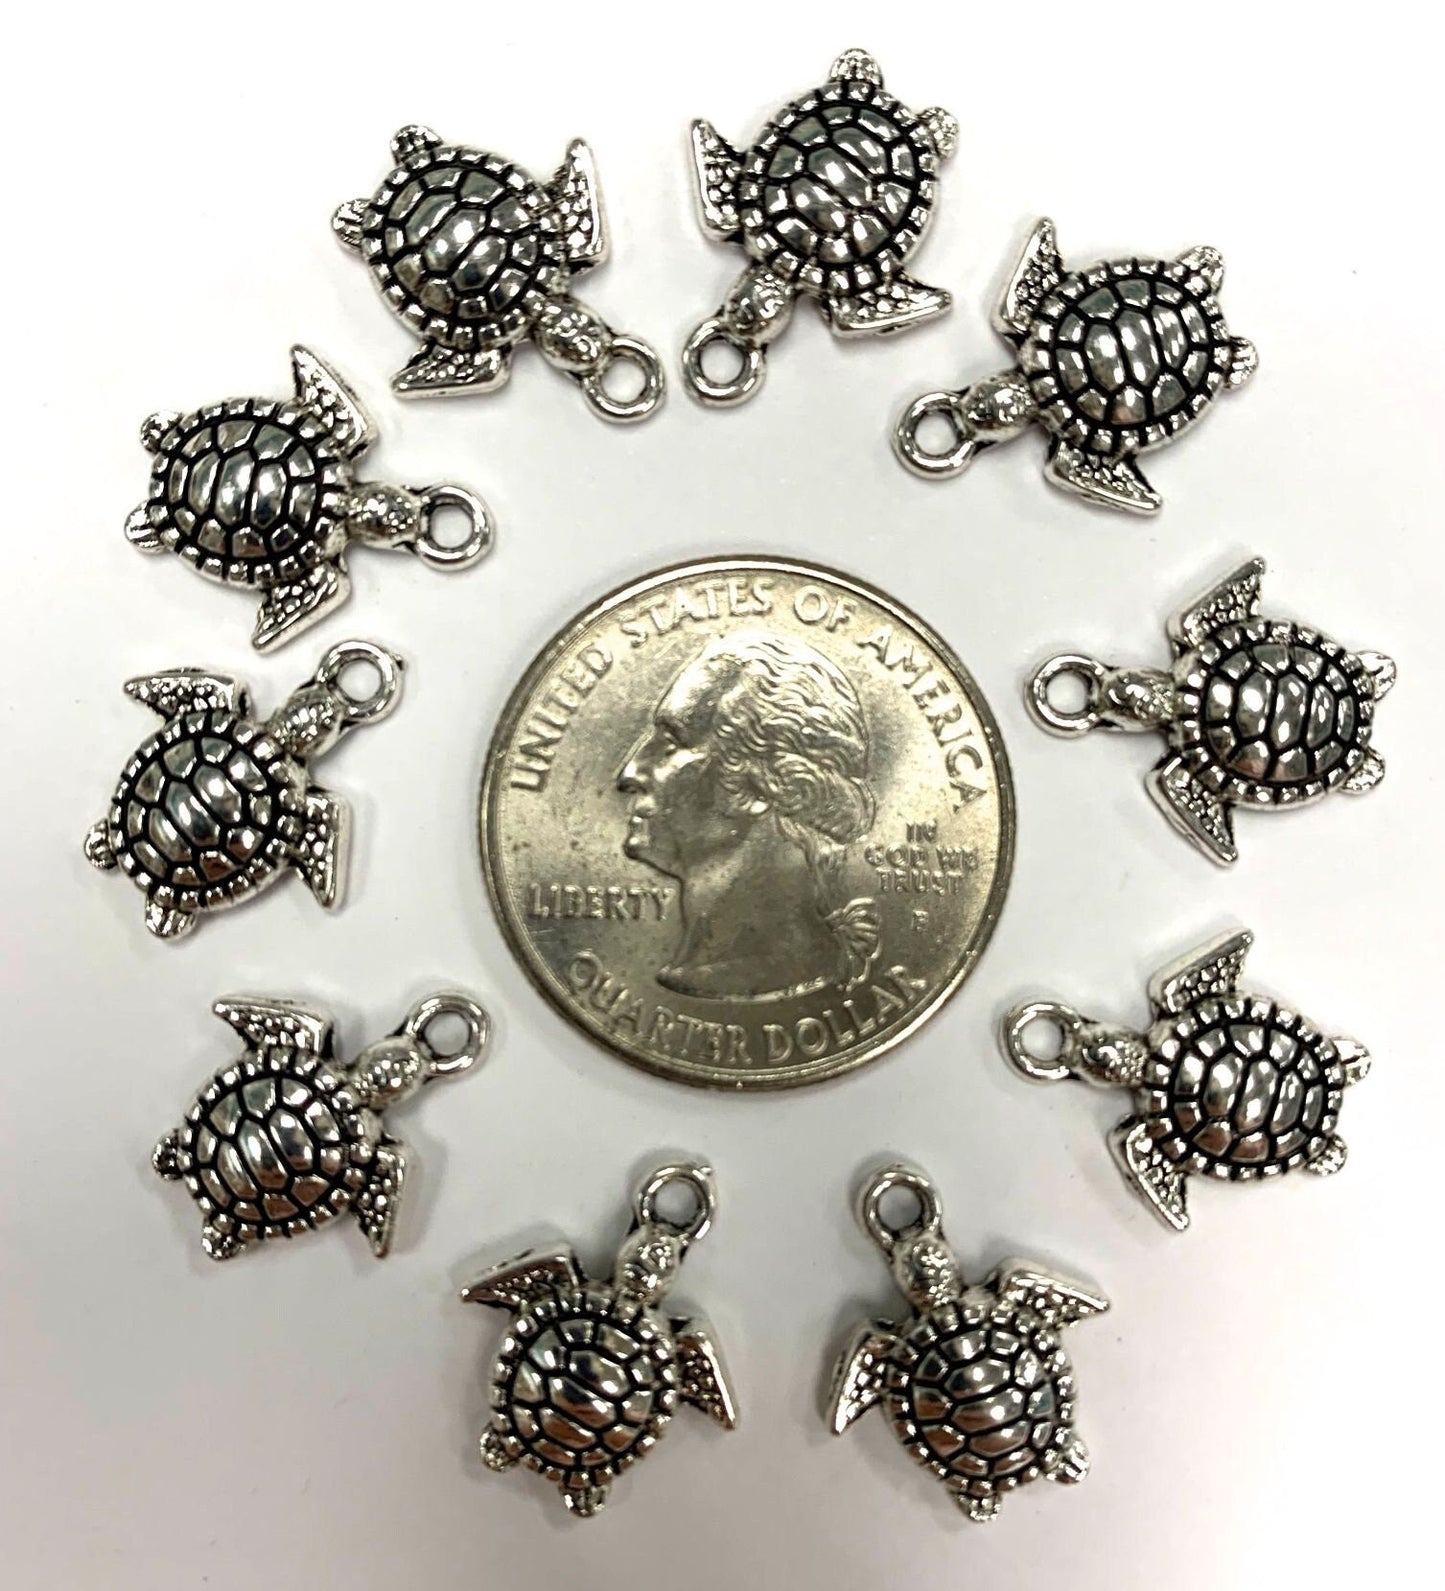 Turtle Charms, 10 pc silverplate